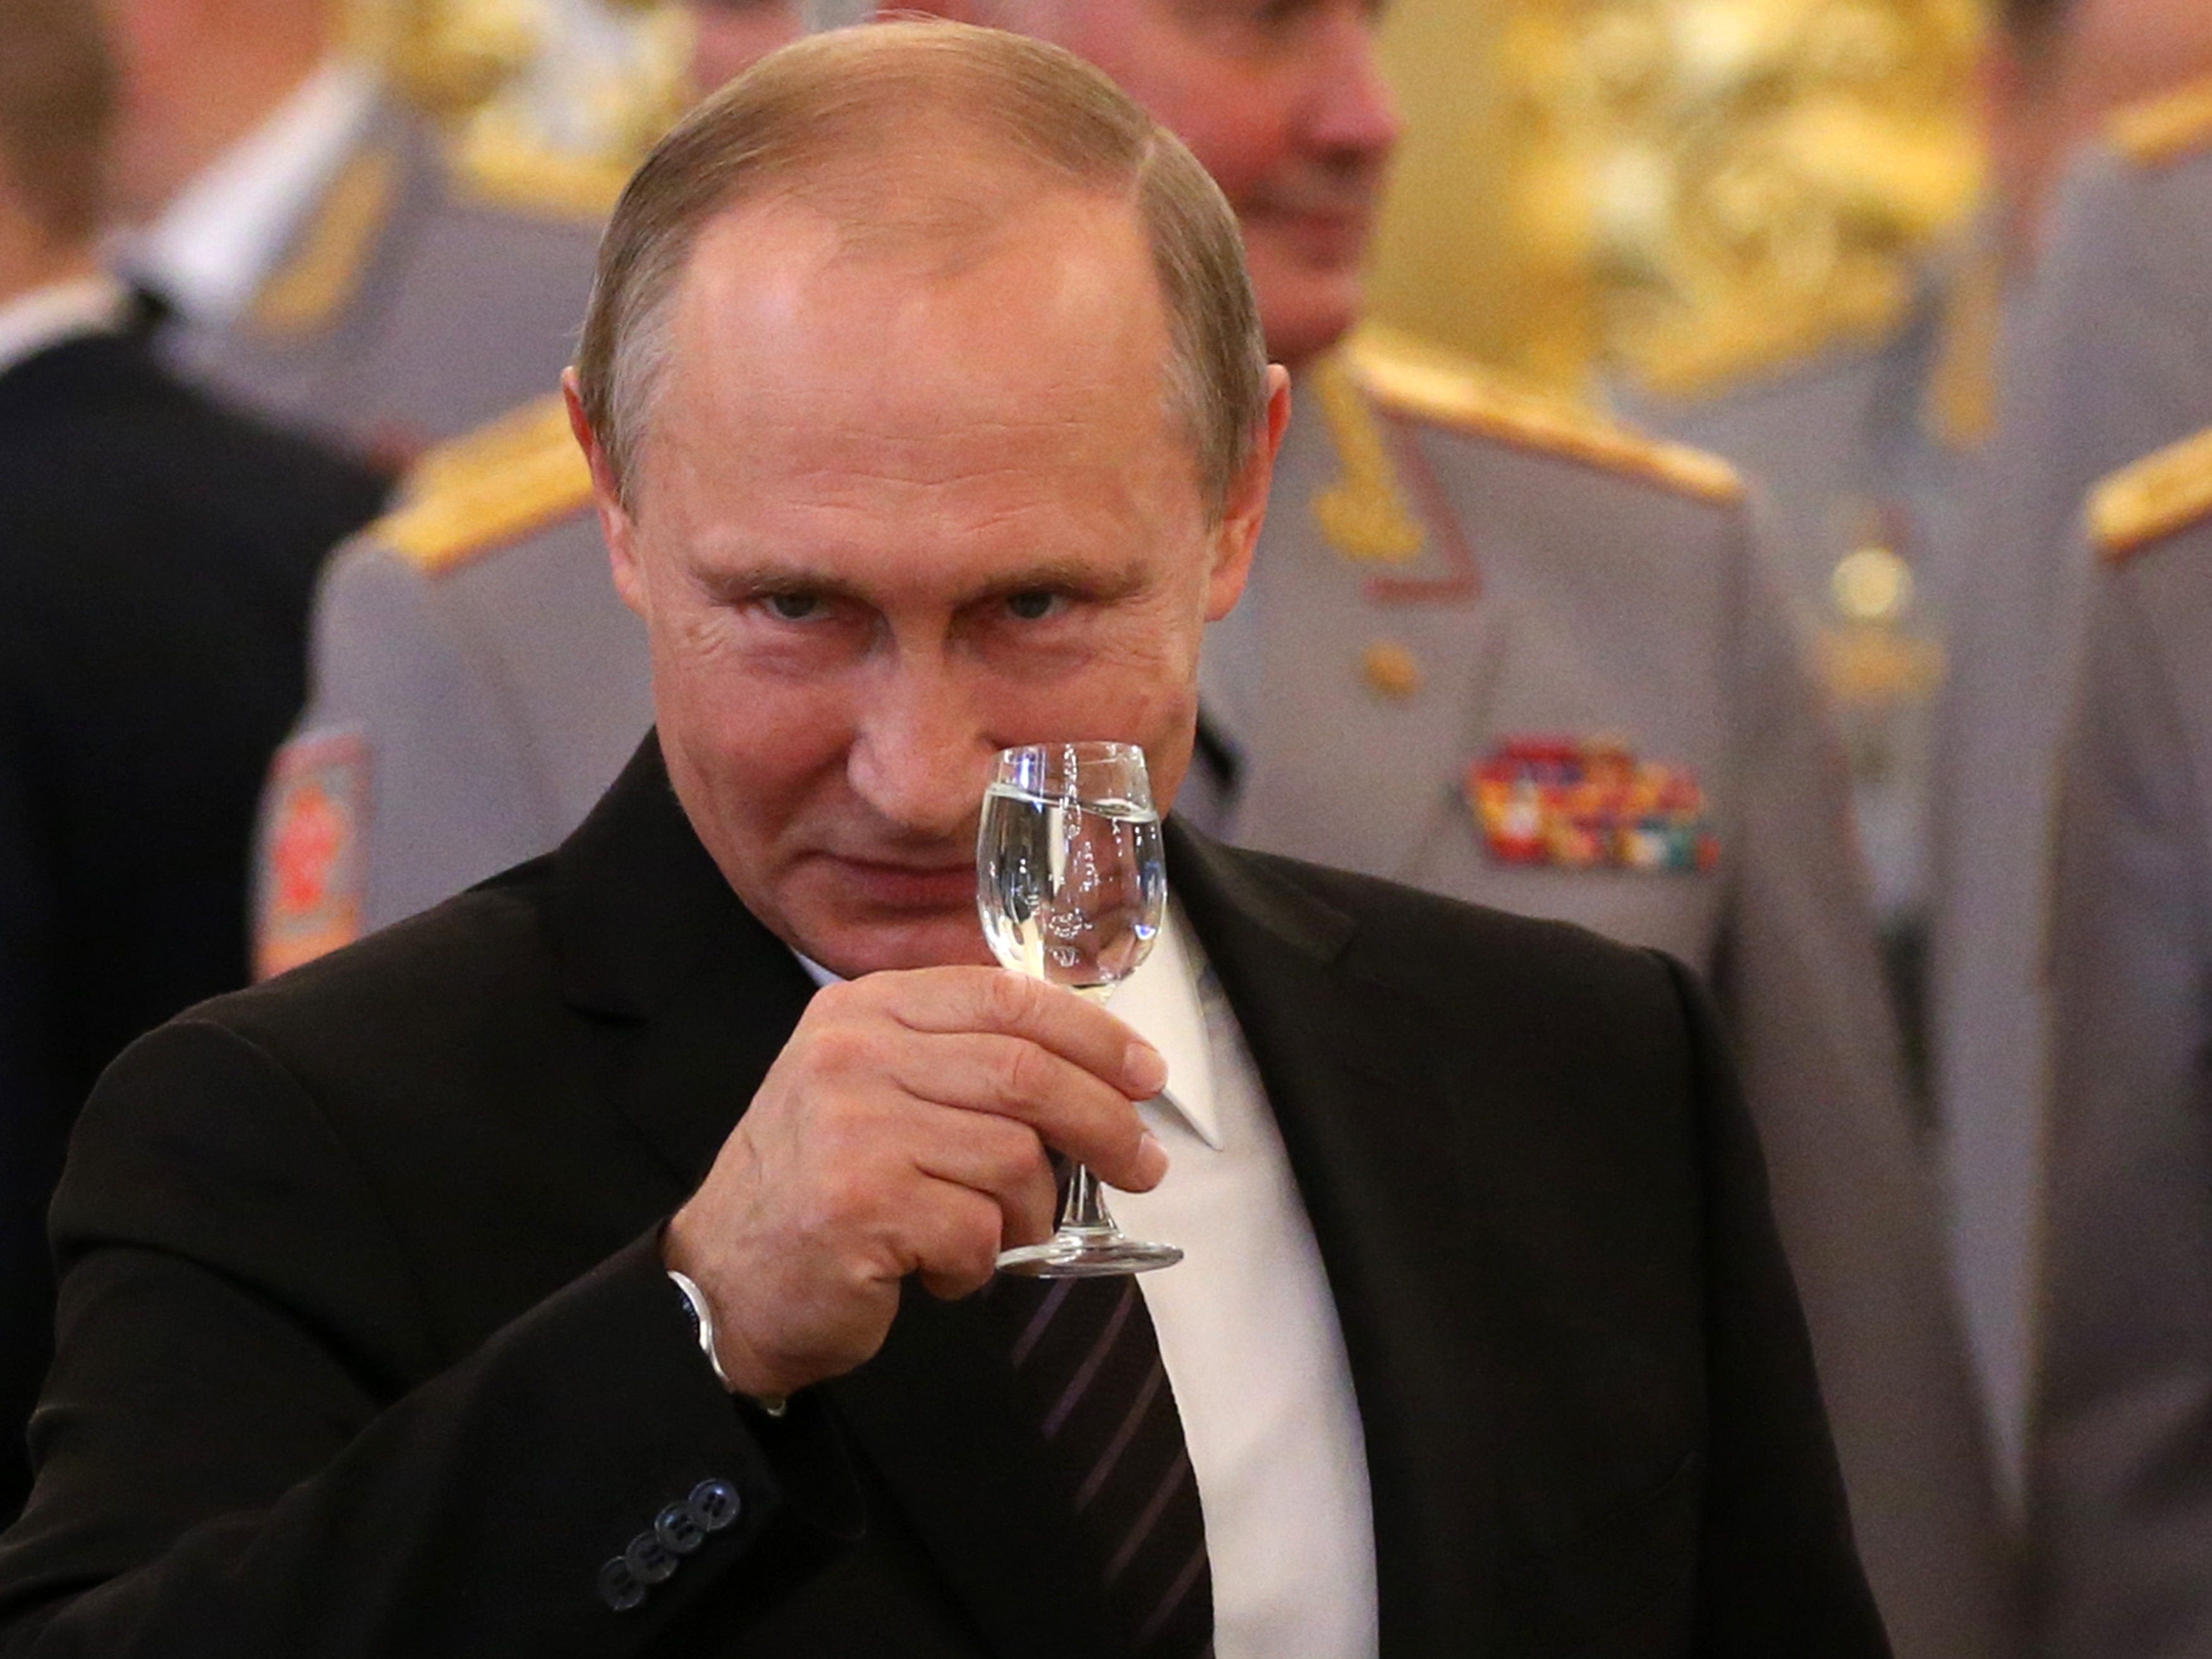 Putin and his Kremlin clique are rolling out their own kids at the 'Russian Davos'